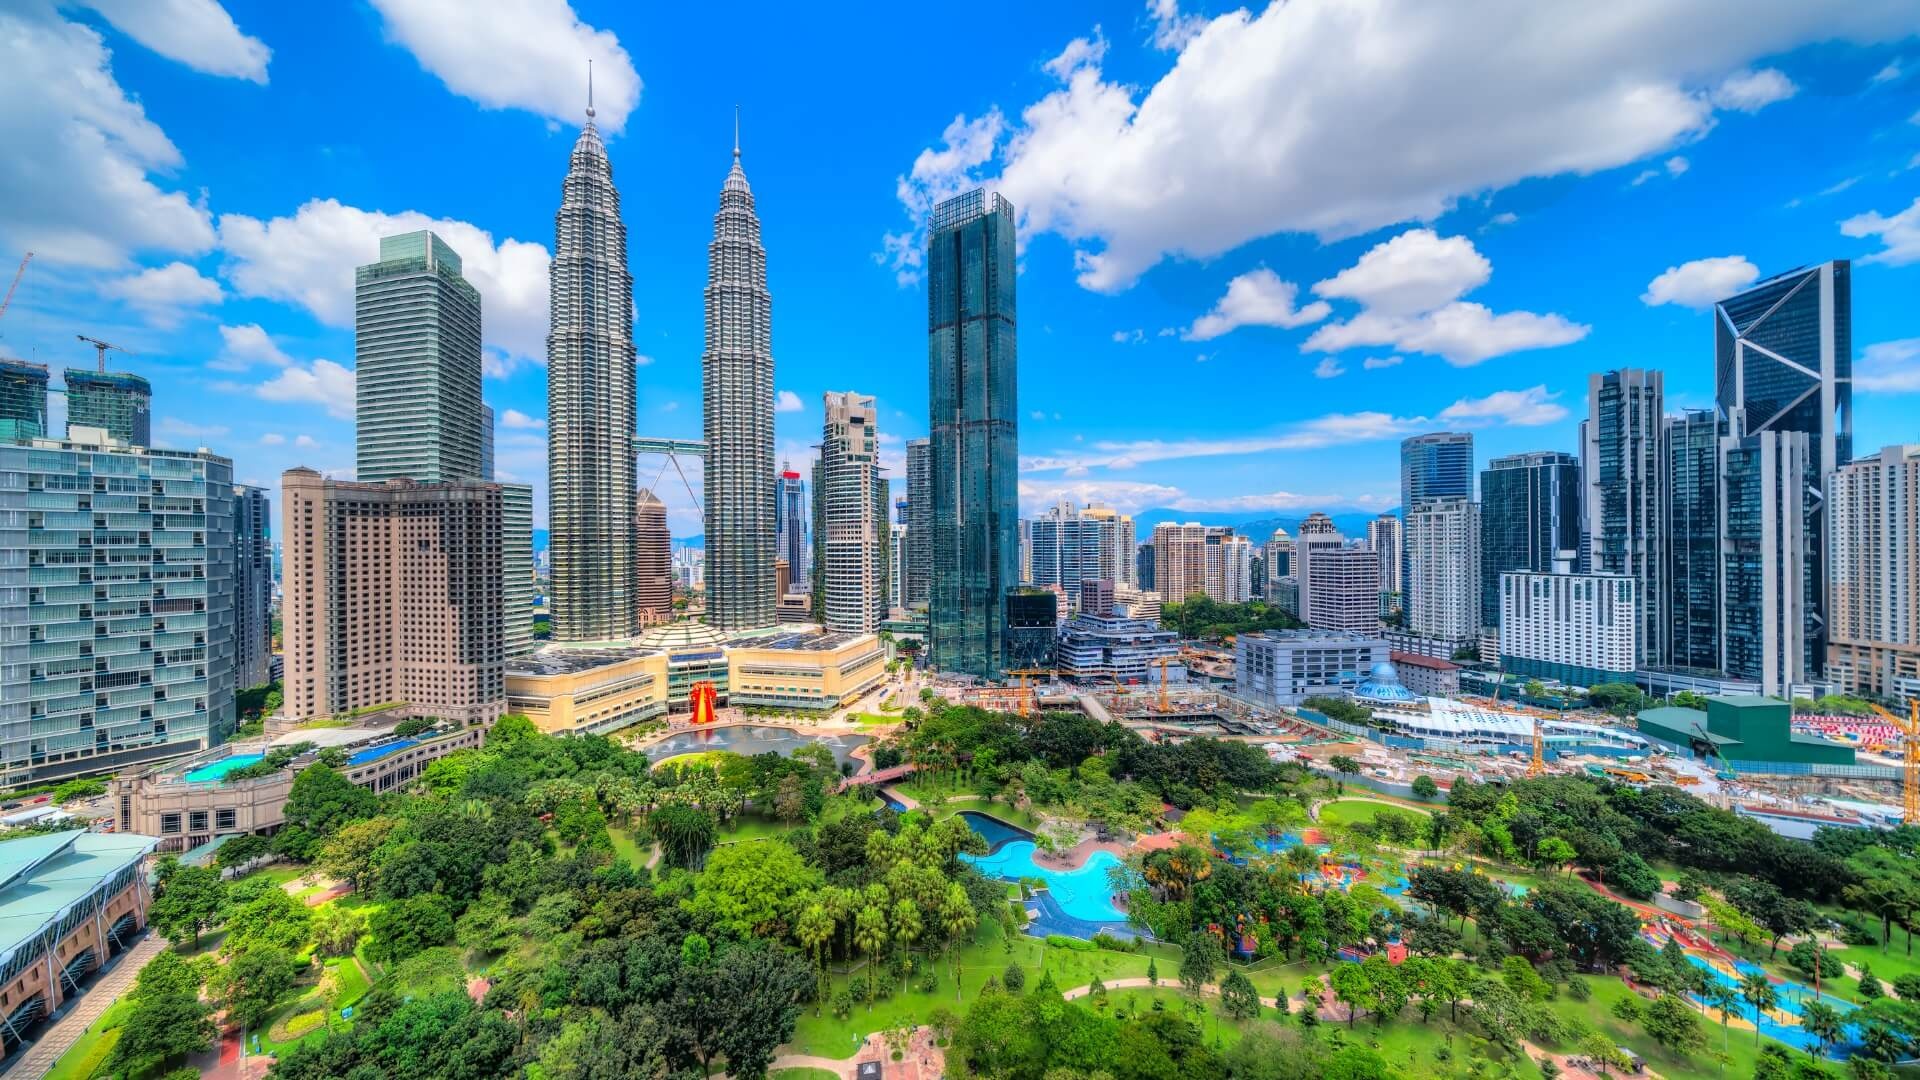 Kuala Lumpur guide, Travel author, Local attractions, City review, 1920x1080 Full HD Desktop